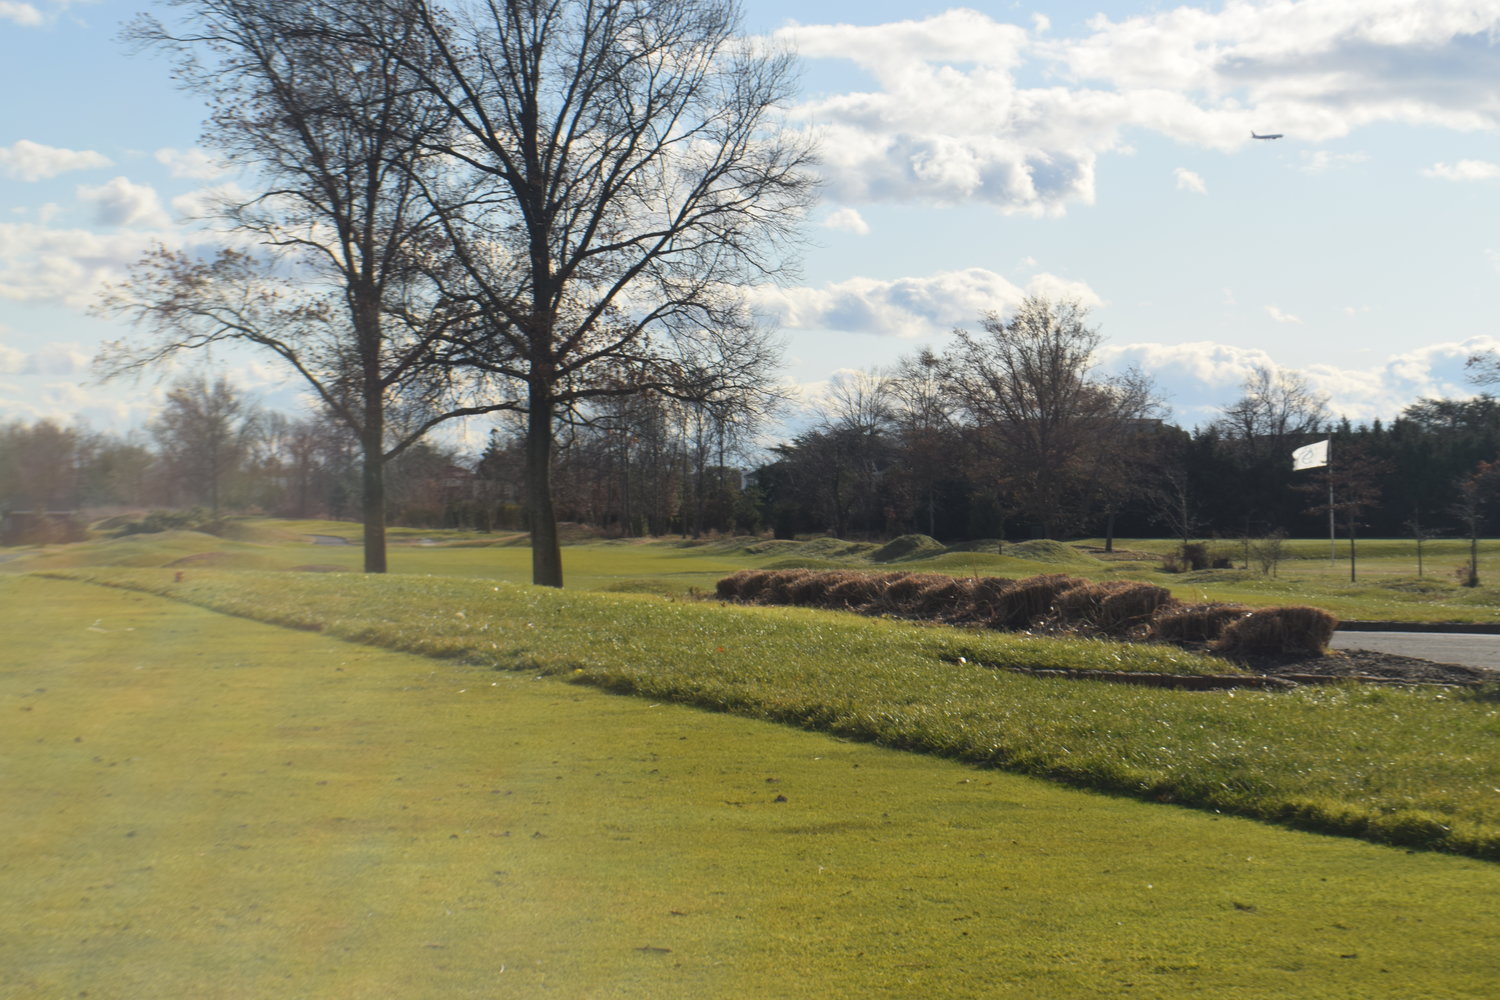 Seawane’s golf course will undergo some improvements before the new season begins.